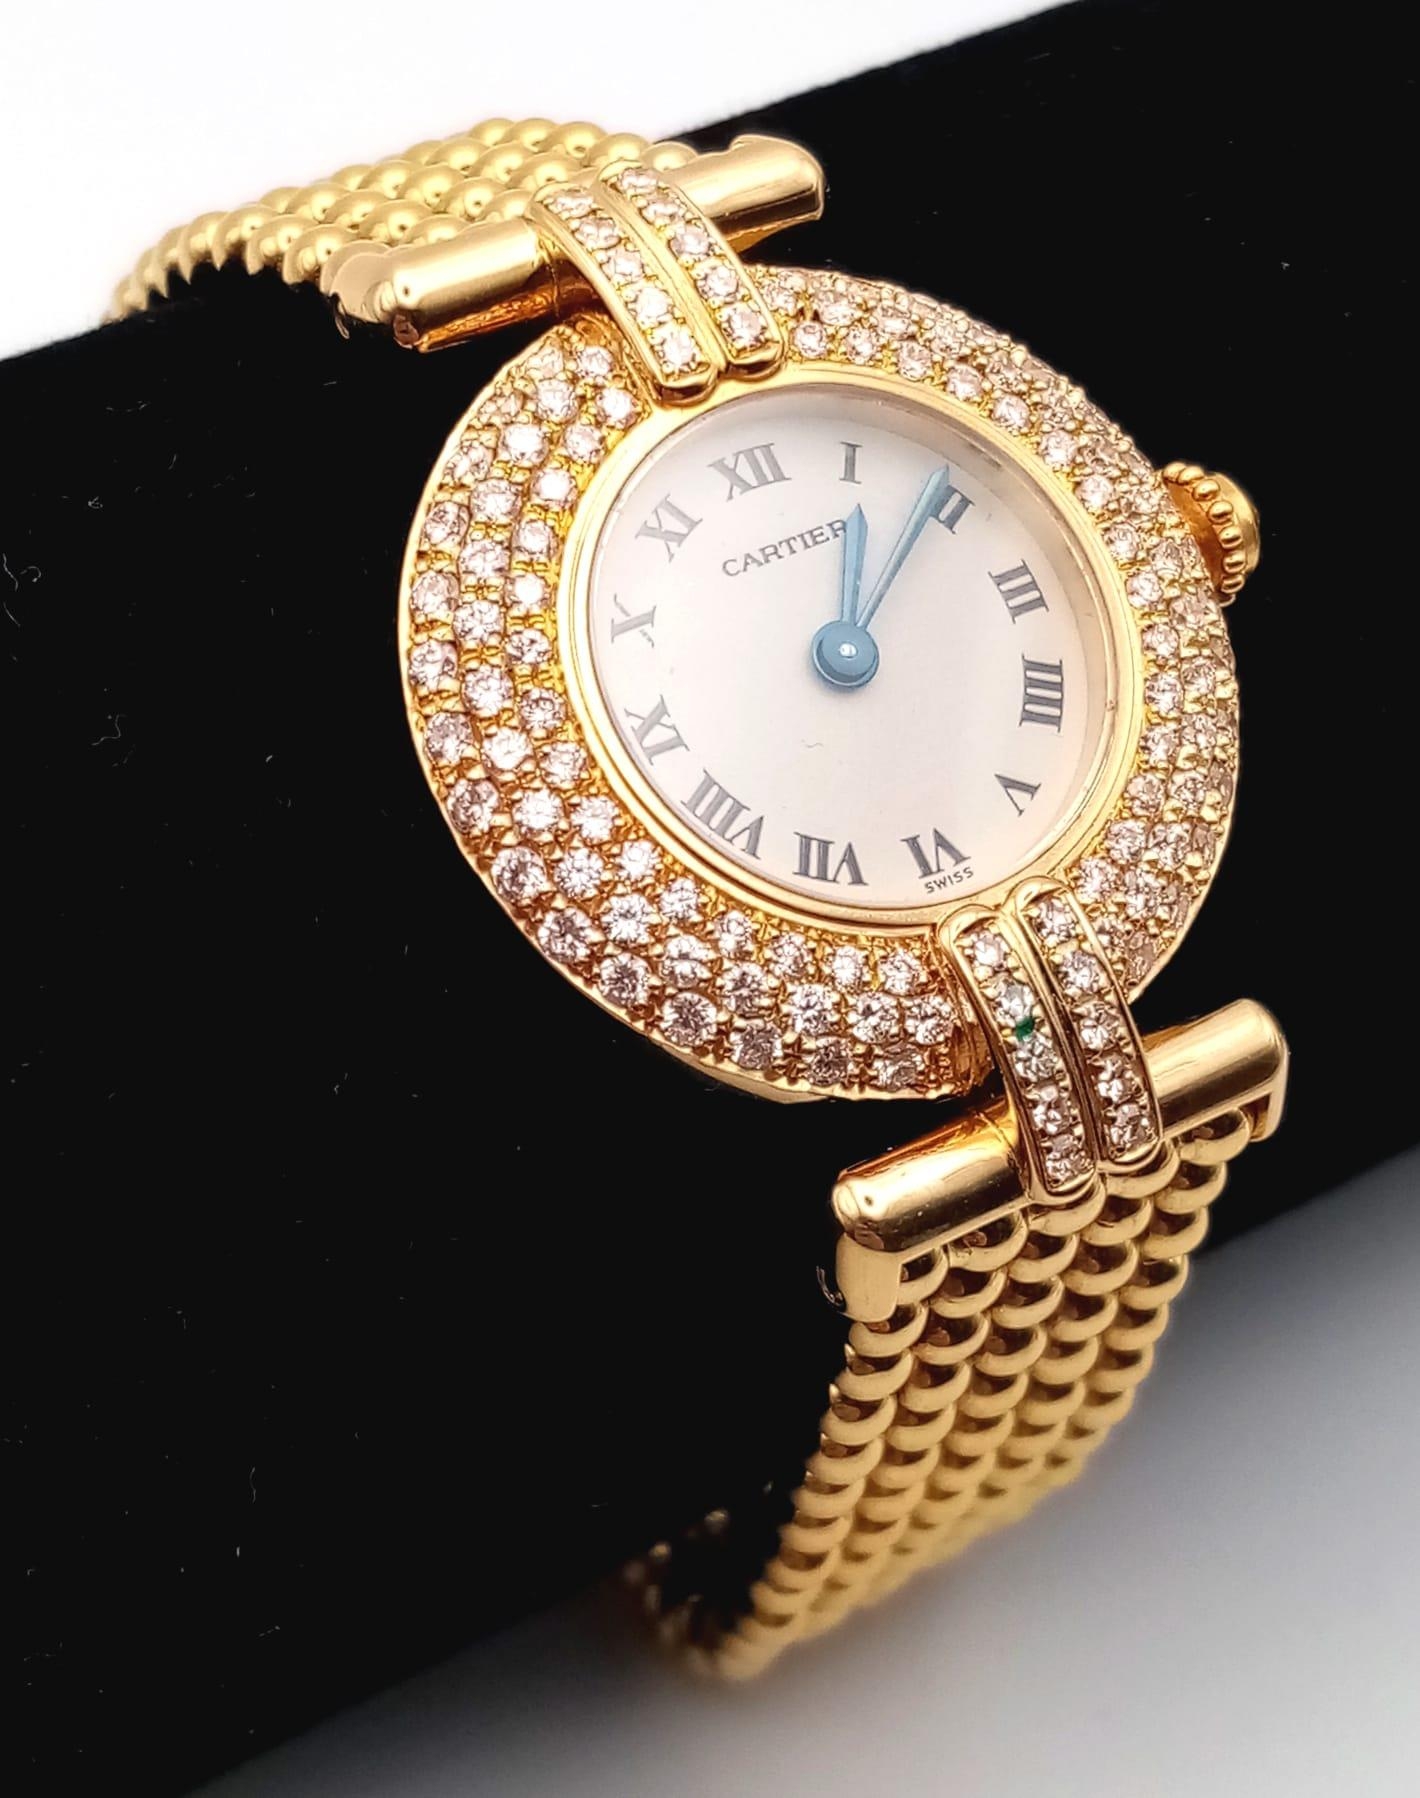 A Cartier 18K Yellow Gold and Diamond Ladies Watch. Gold ball-link bracelet. Gold circular case - - Image 2 of 8